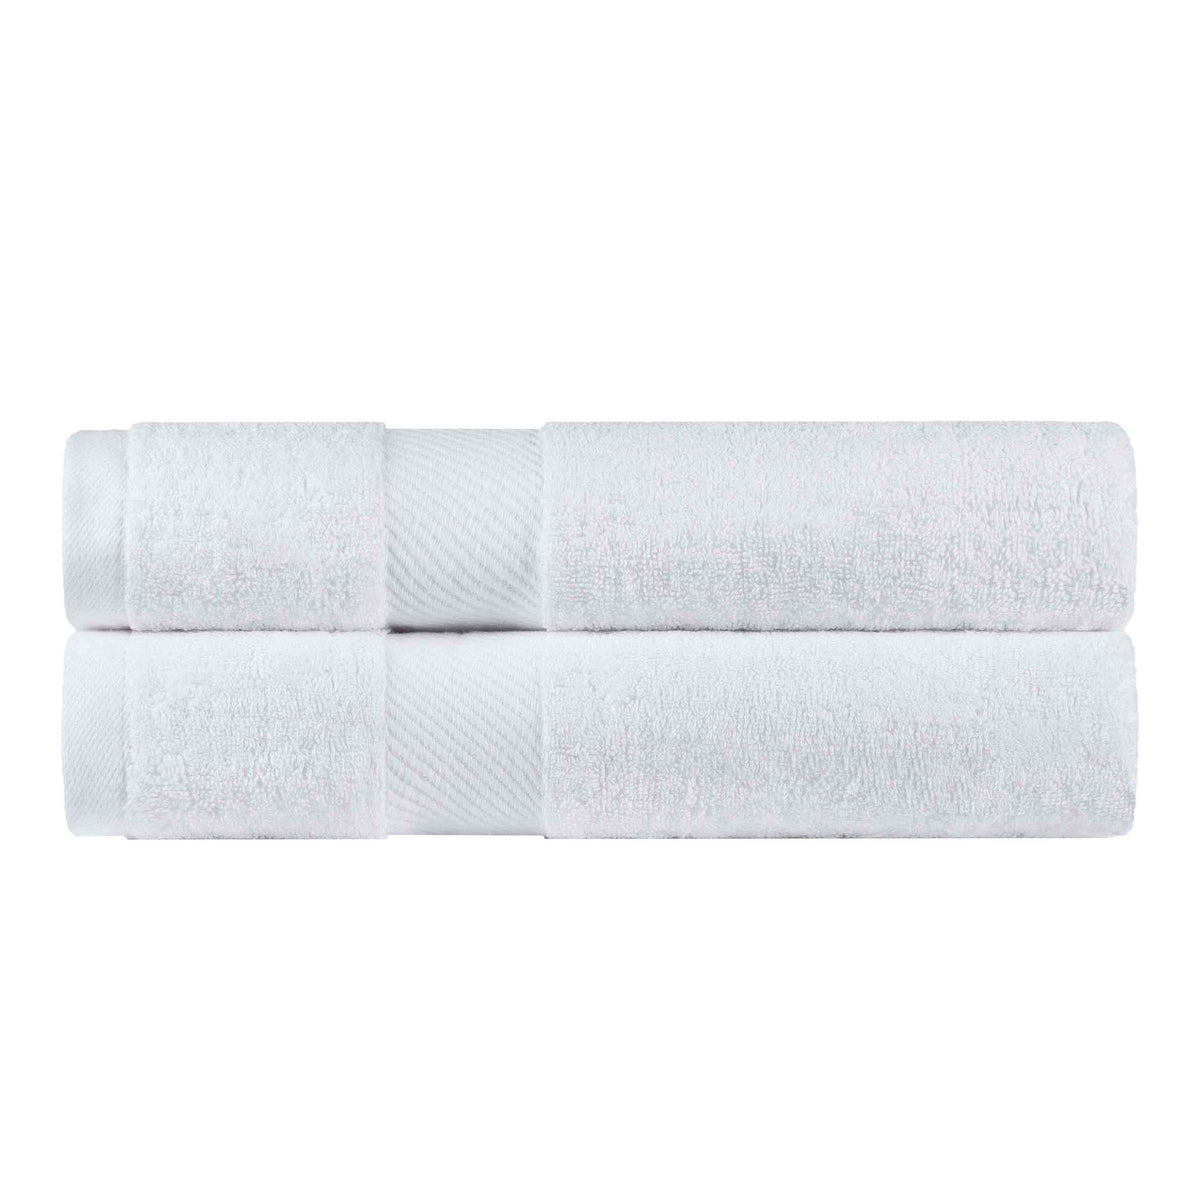 Kendell Egyptian Cotton Solid Medium Weight Bath Towel Set of 2 - White